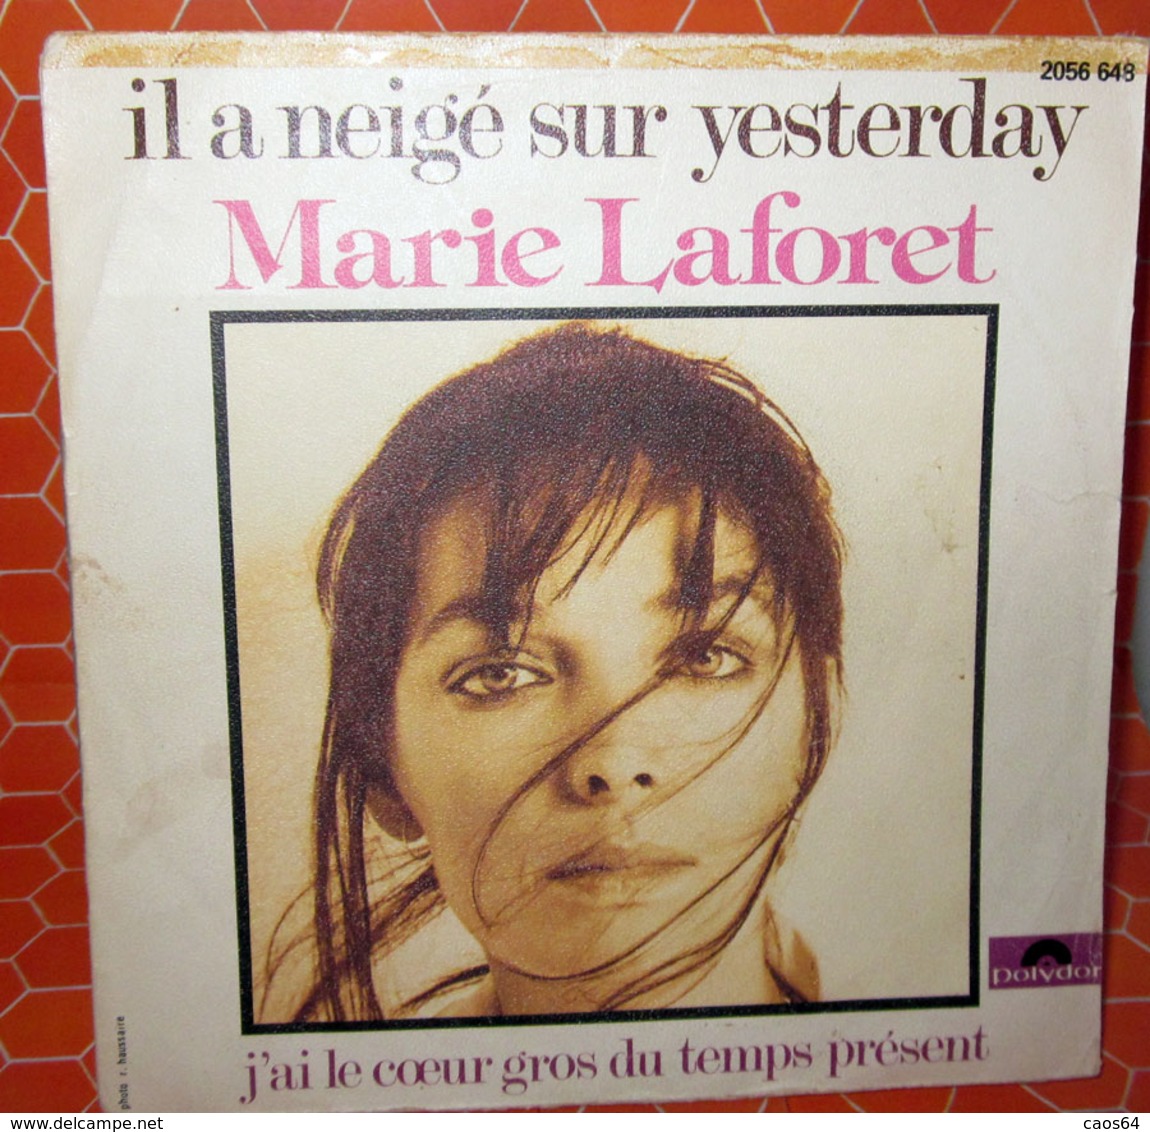 MARIE LAFORET IL A NEIGE SUR YESTERDAY  AUCUN VINYLE  COVER NO VINYL 45 GIRI - 7" - Accessories & Sleeves